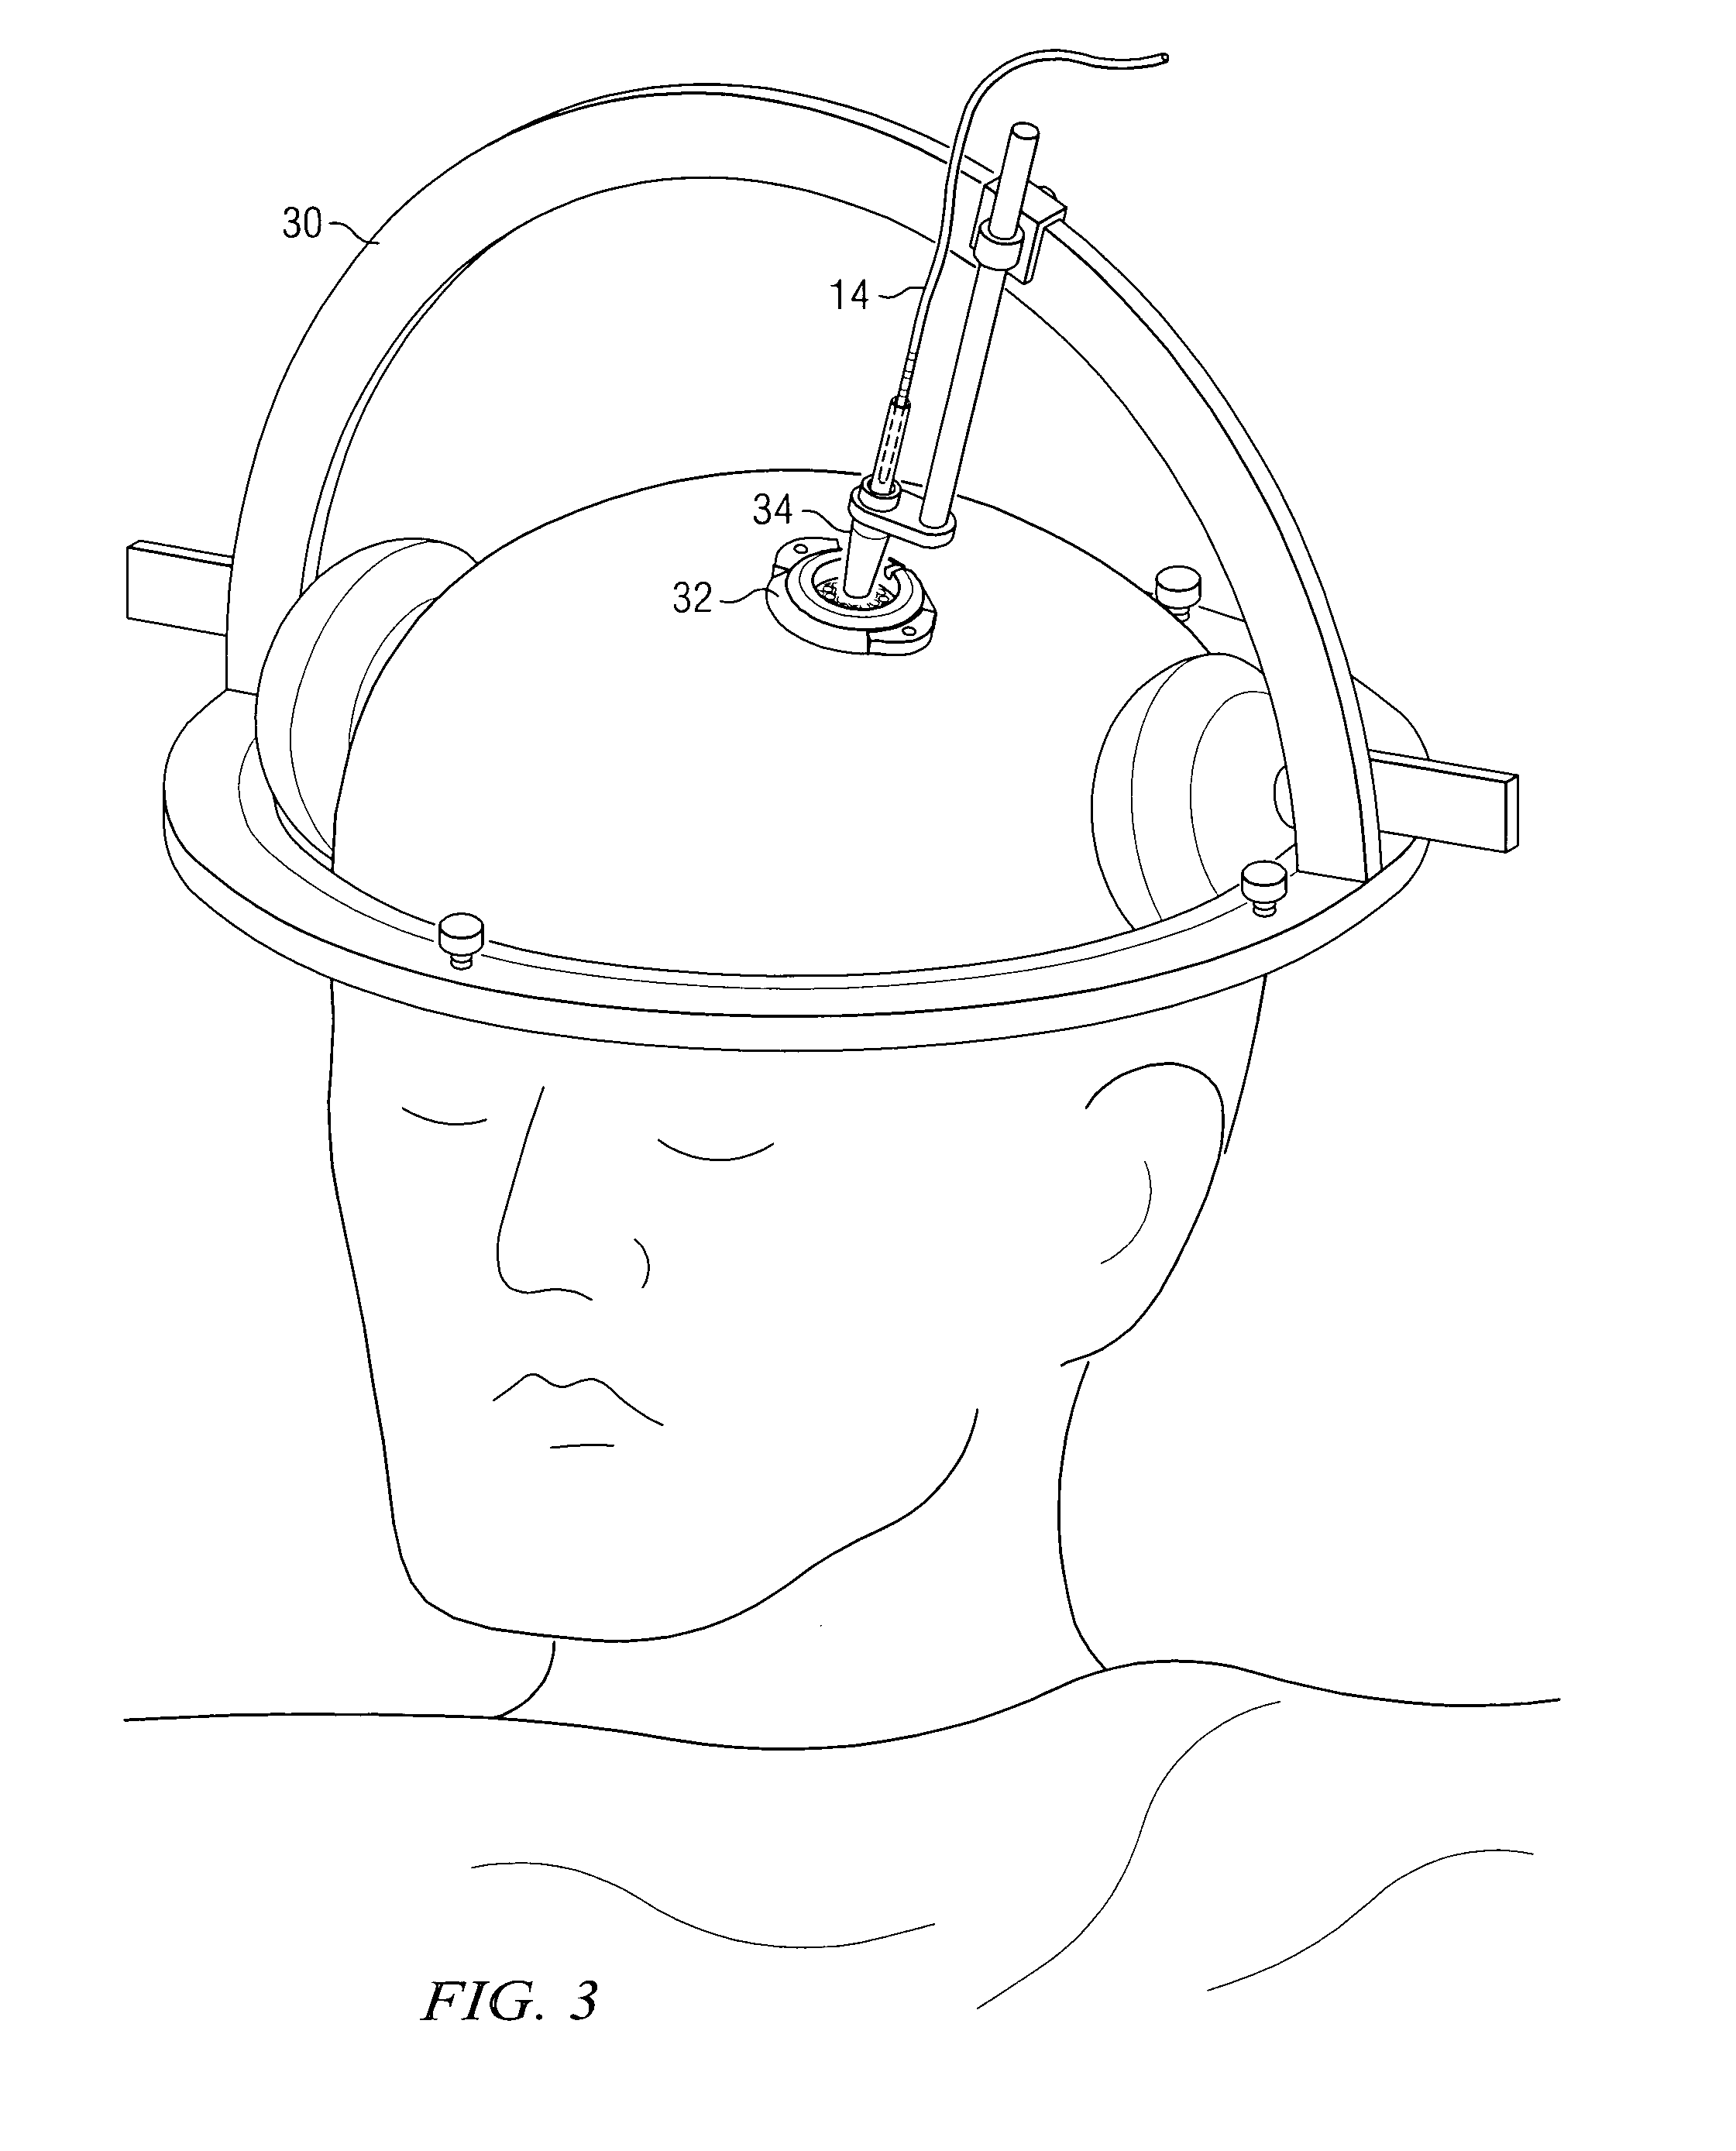 Electrical stimulation system and method for stimulating nerve tissue in the brain using a stimulation lead having a tip electrode, having at least five electrodes, or both